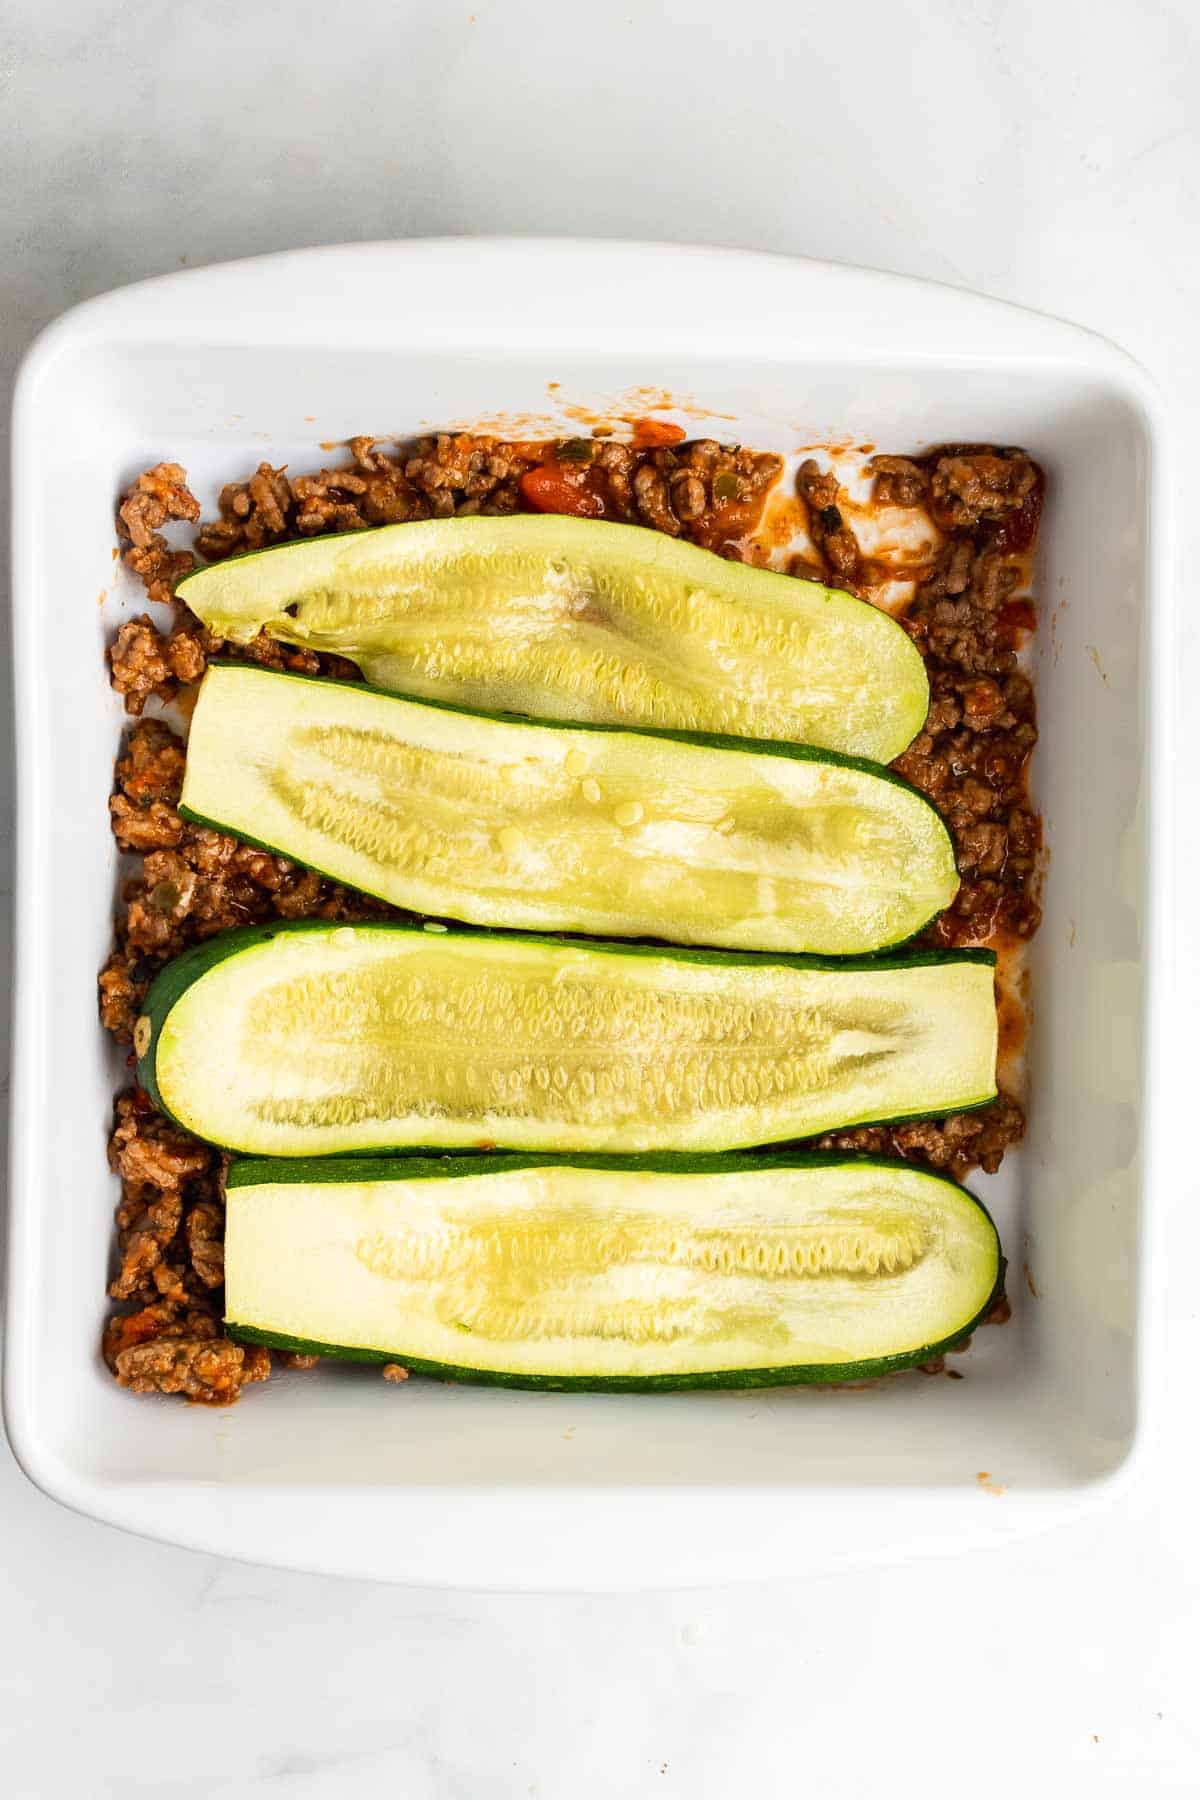 Four zucchini slices layered onto the ground beef and tomato sauce mixture in a baking dish